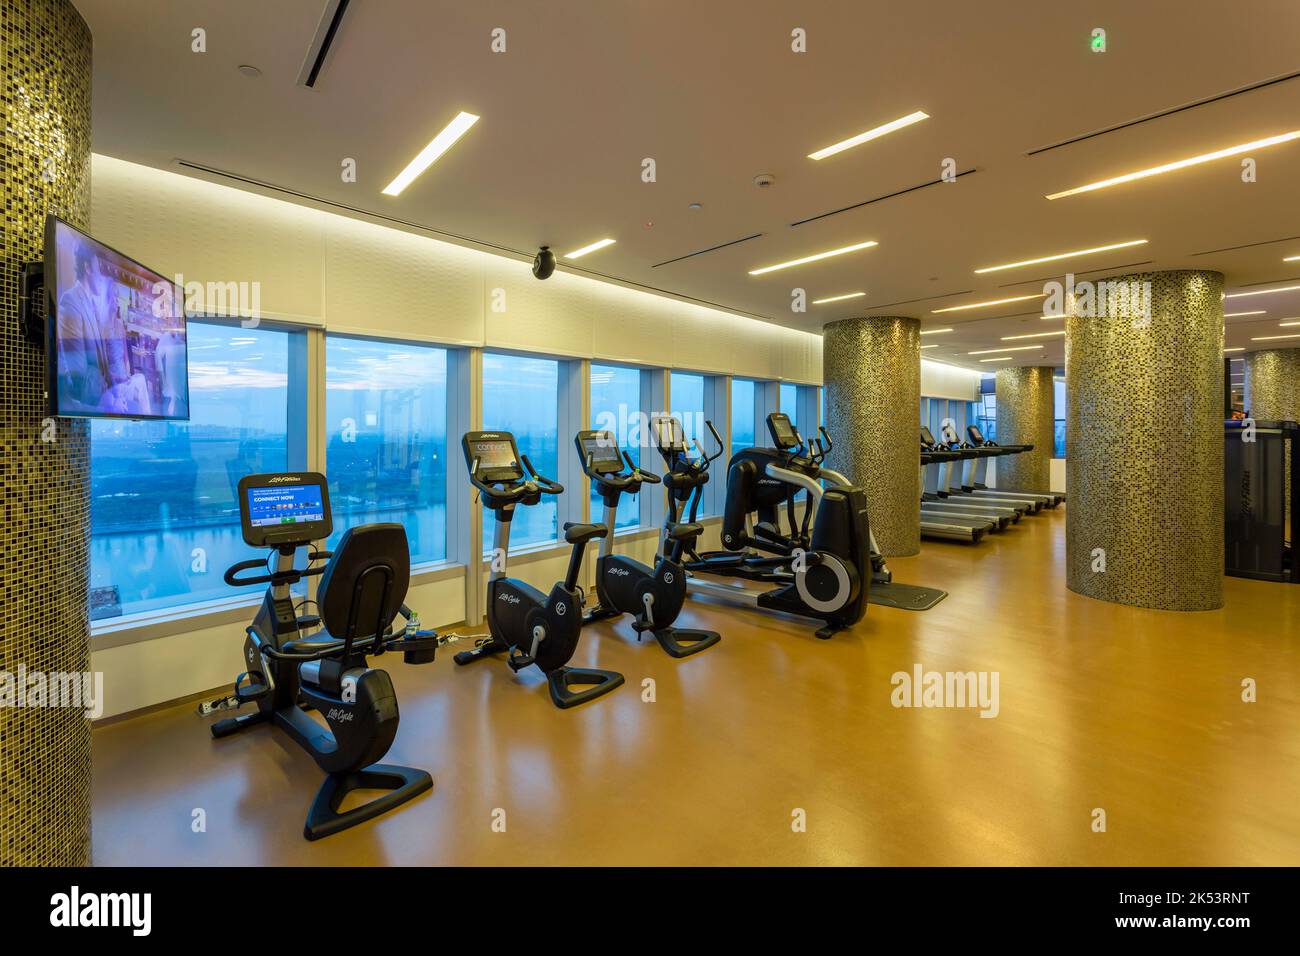 Hanoi, Vietnam - January 22, 2018: Interior view of the fitness center and gym exercise equipment at Le Meridien in Hanoi, Vietnam. Stock Photo